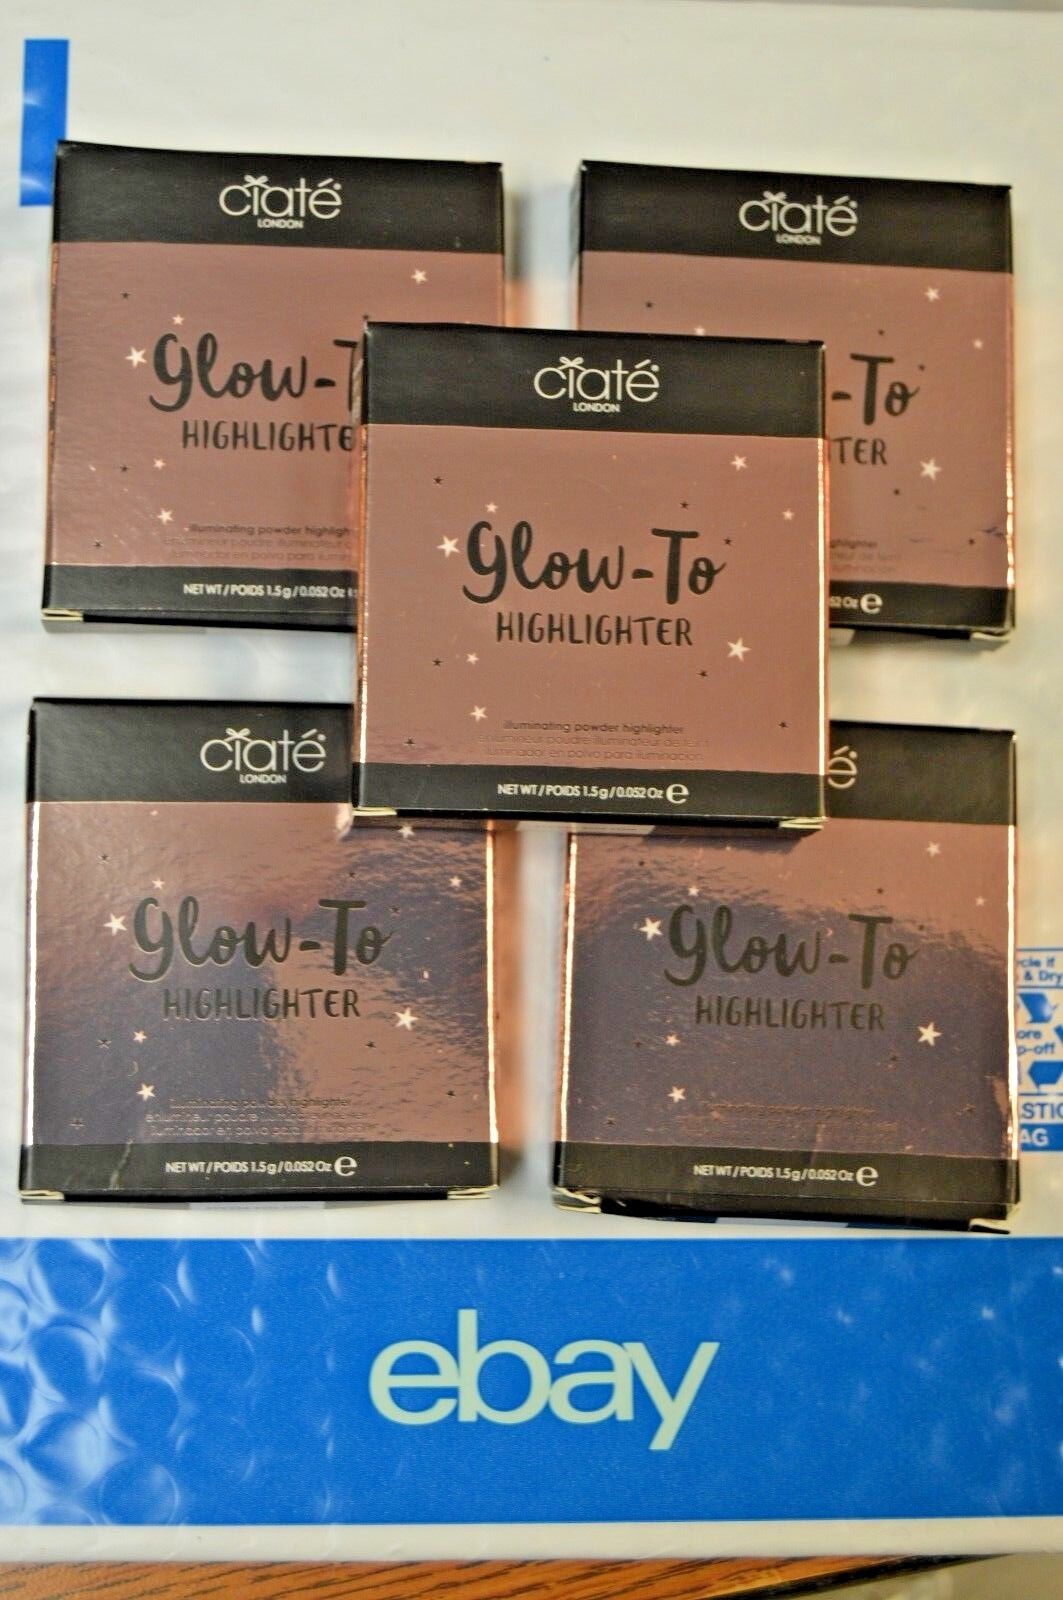 5x Ciate London Glow To Highlighter illuminating Powder Moondust Dented Boxes Ciate London Glow To Highlighter